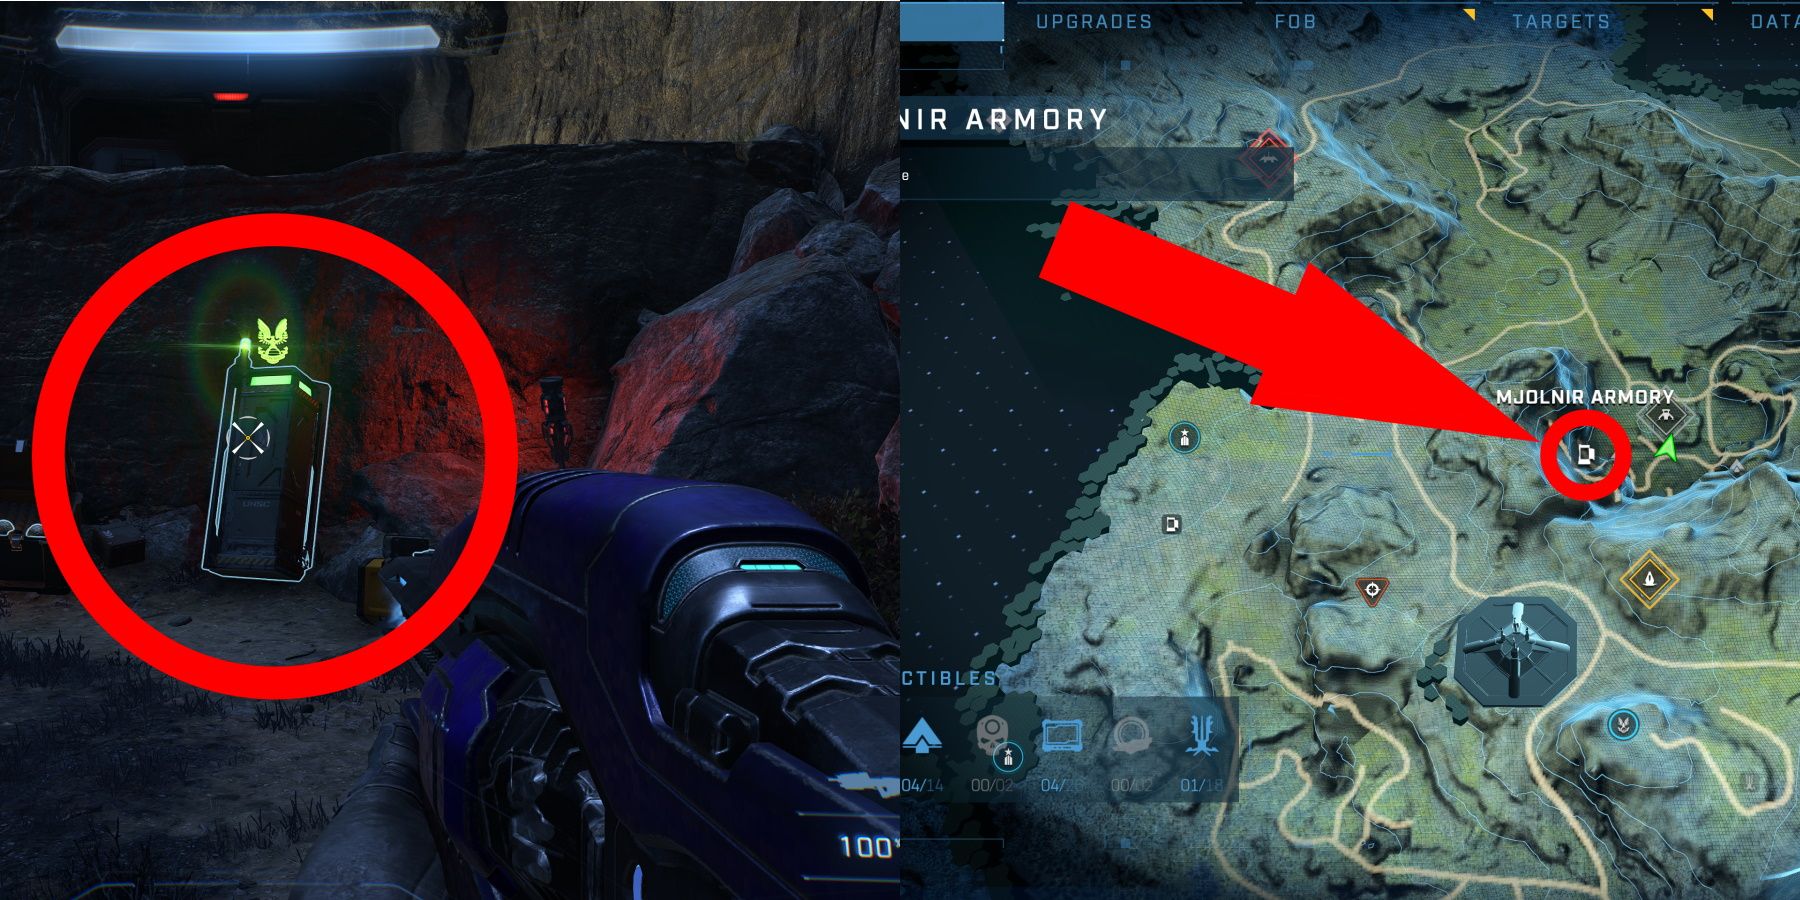 Excavation Site Mjolnir Armor Location circled in game and on map